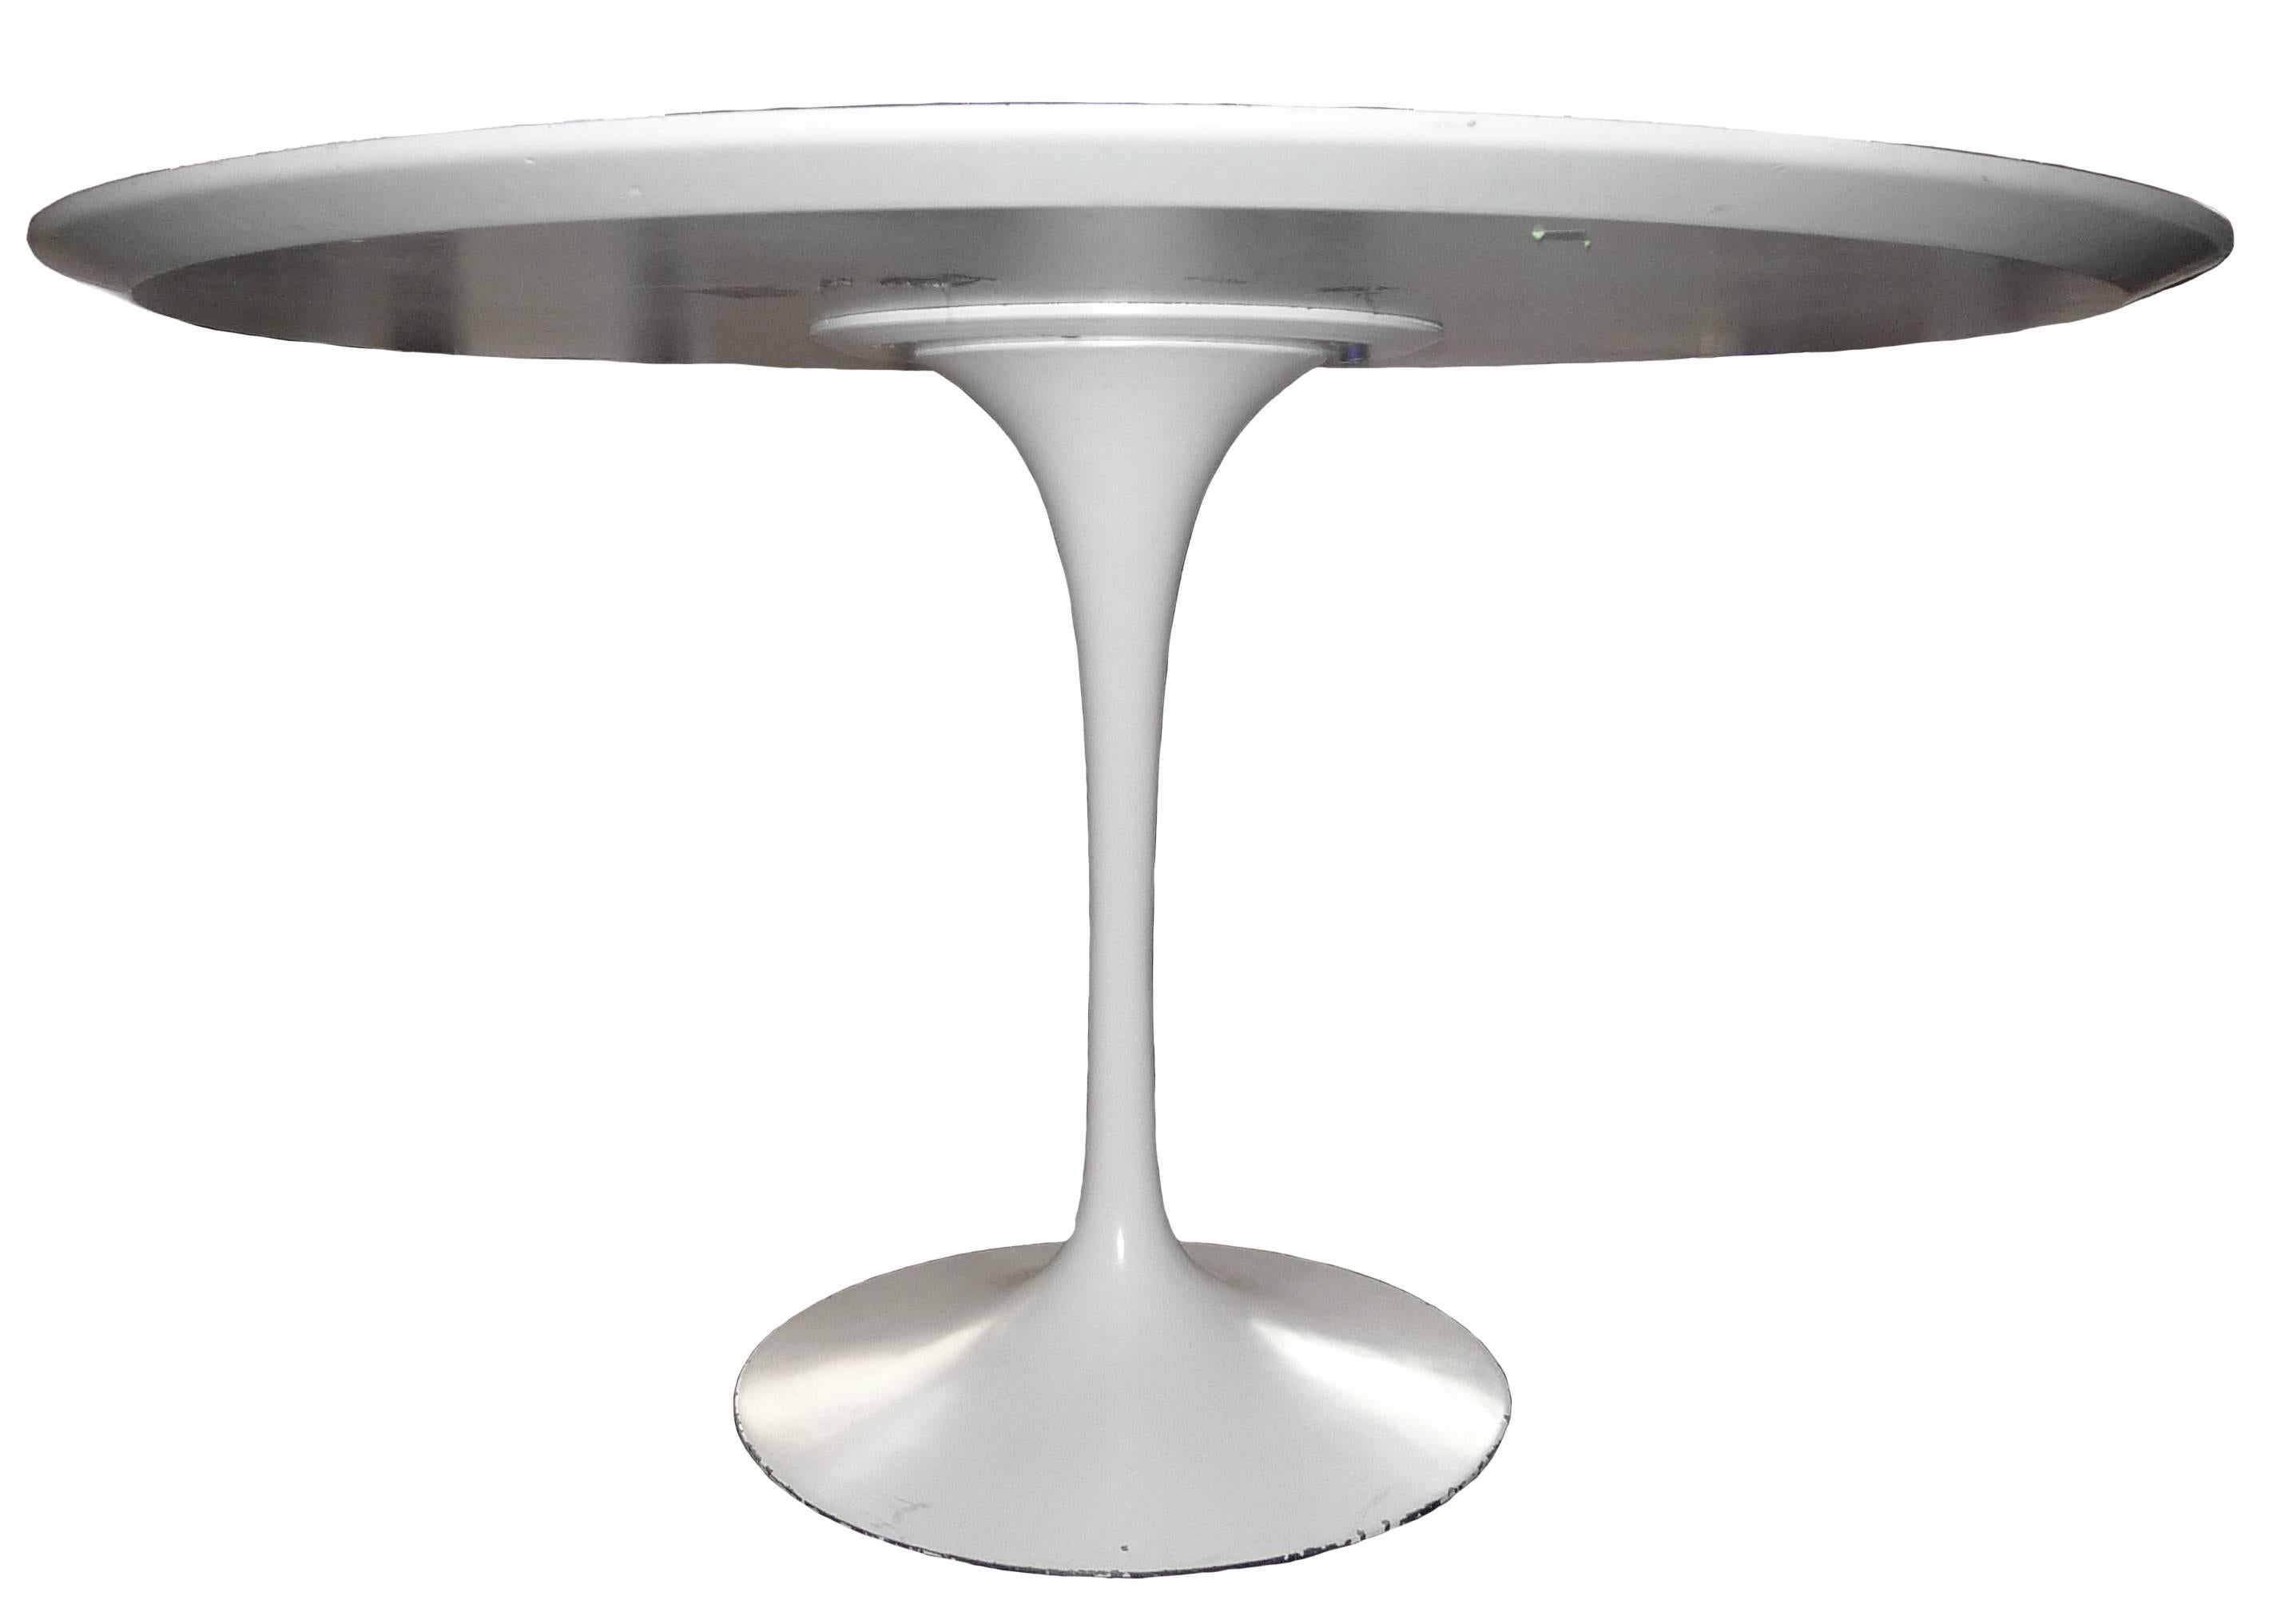 1979 Knoll Saarinen tulip dining table. White laminate top with white metal base. Light wear around the table base and edges of table. Sticker on the underside indicates November 8, 1979 manufacturing date.